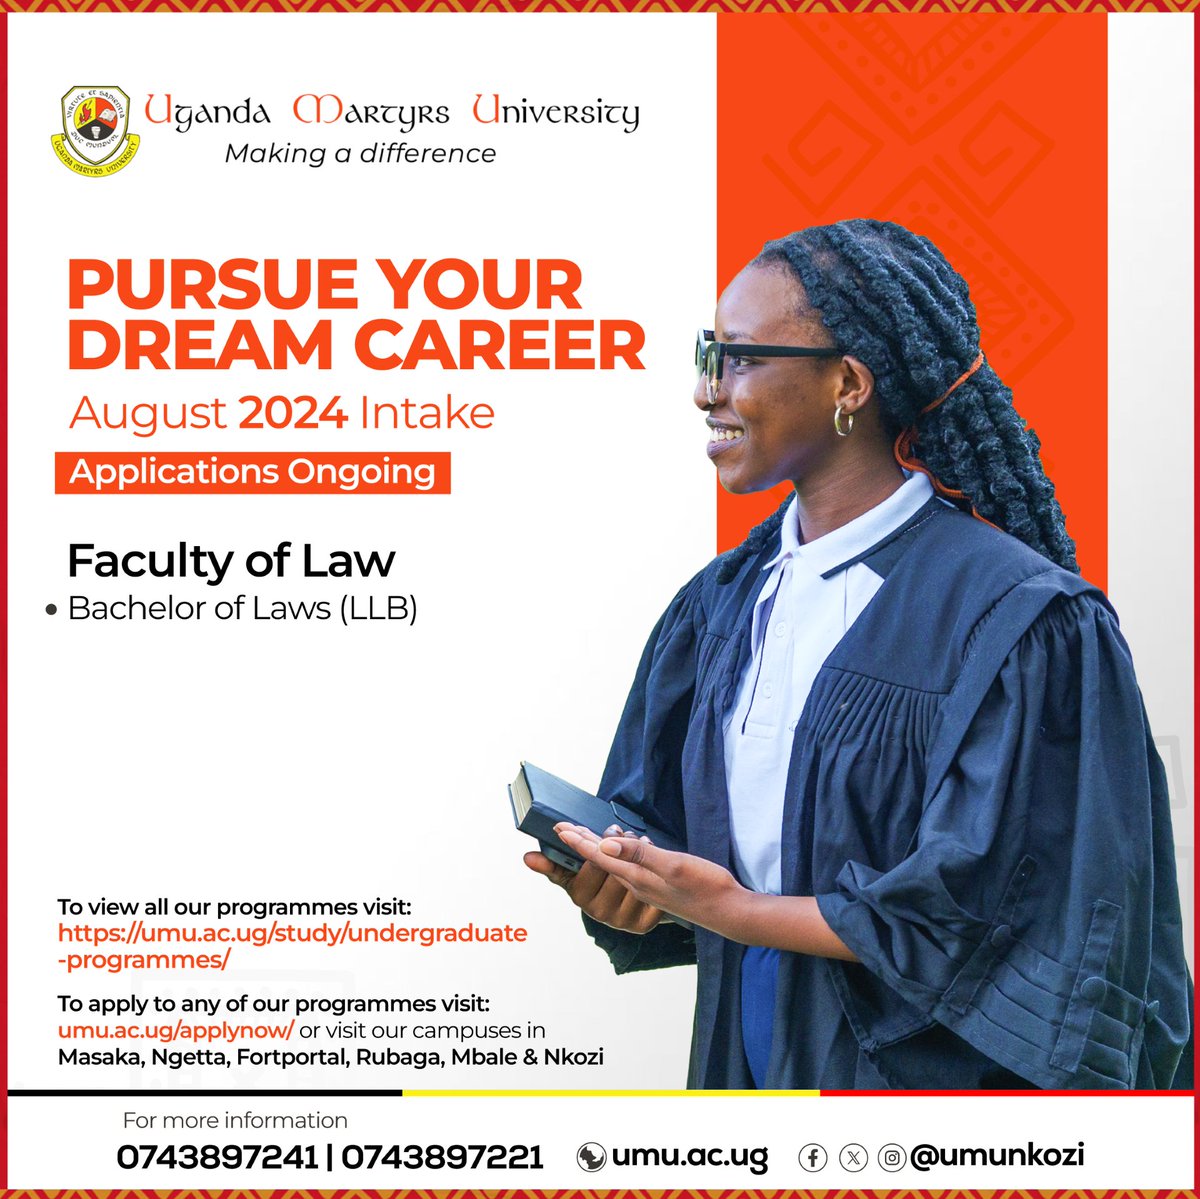 AD Passionate about pursuing a career in Law? Don't miss out on the August 2024 intake at Uganda Martyrs University! Apply now 👉 umu.ac.ug/applynow/ Call☎️ +256 743897221 /+256 743897241 / admissions.umu.ac.ug #UMU @umunkozi